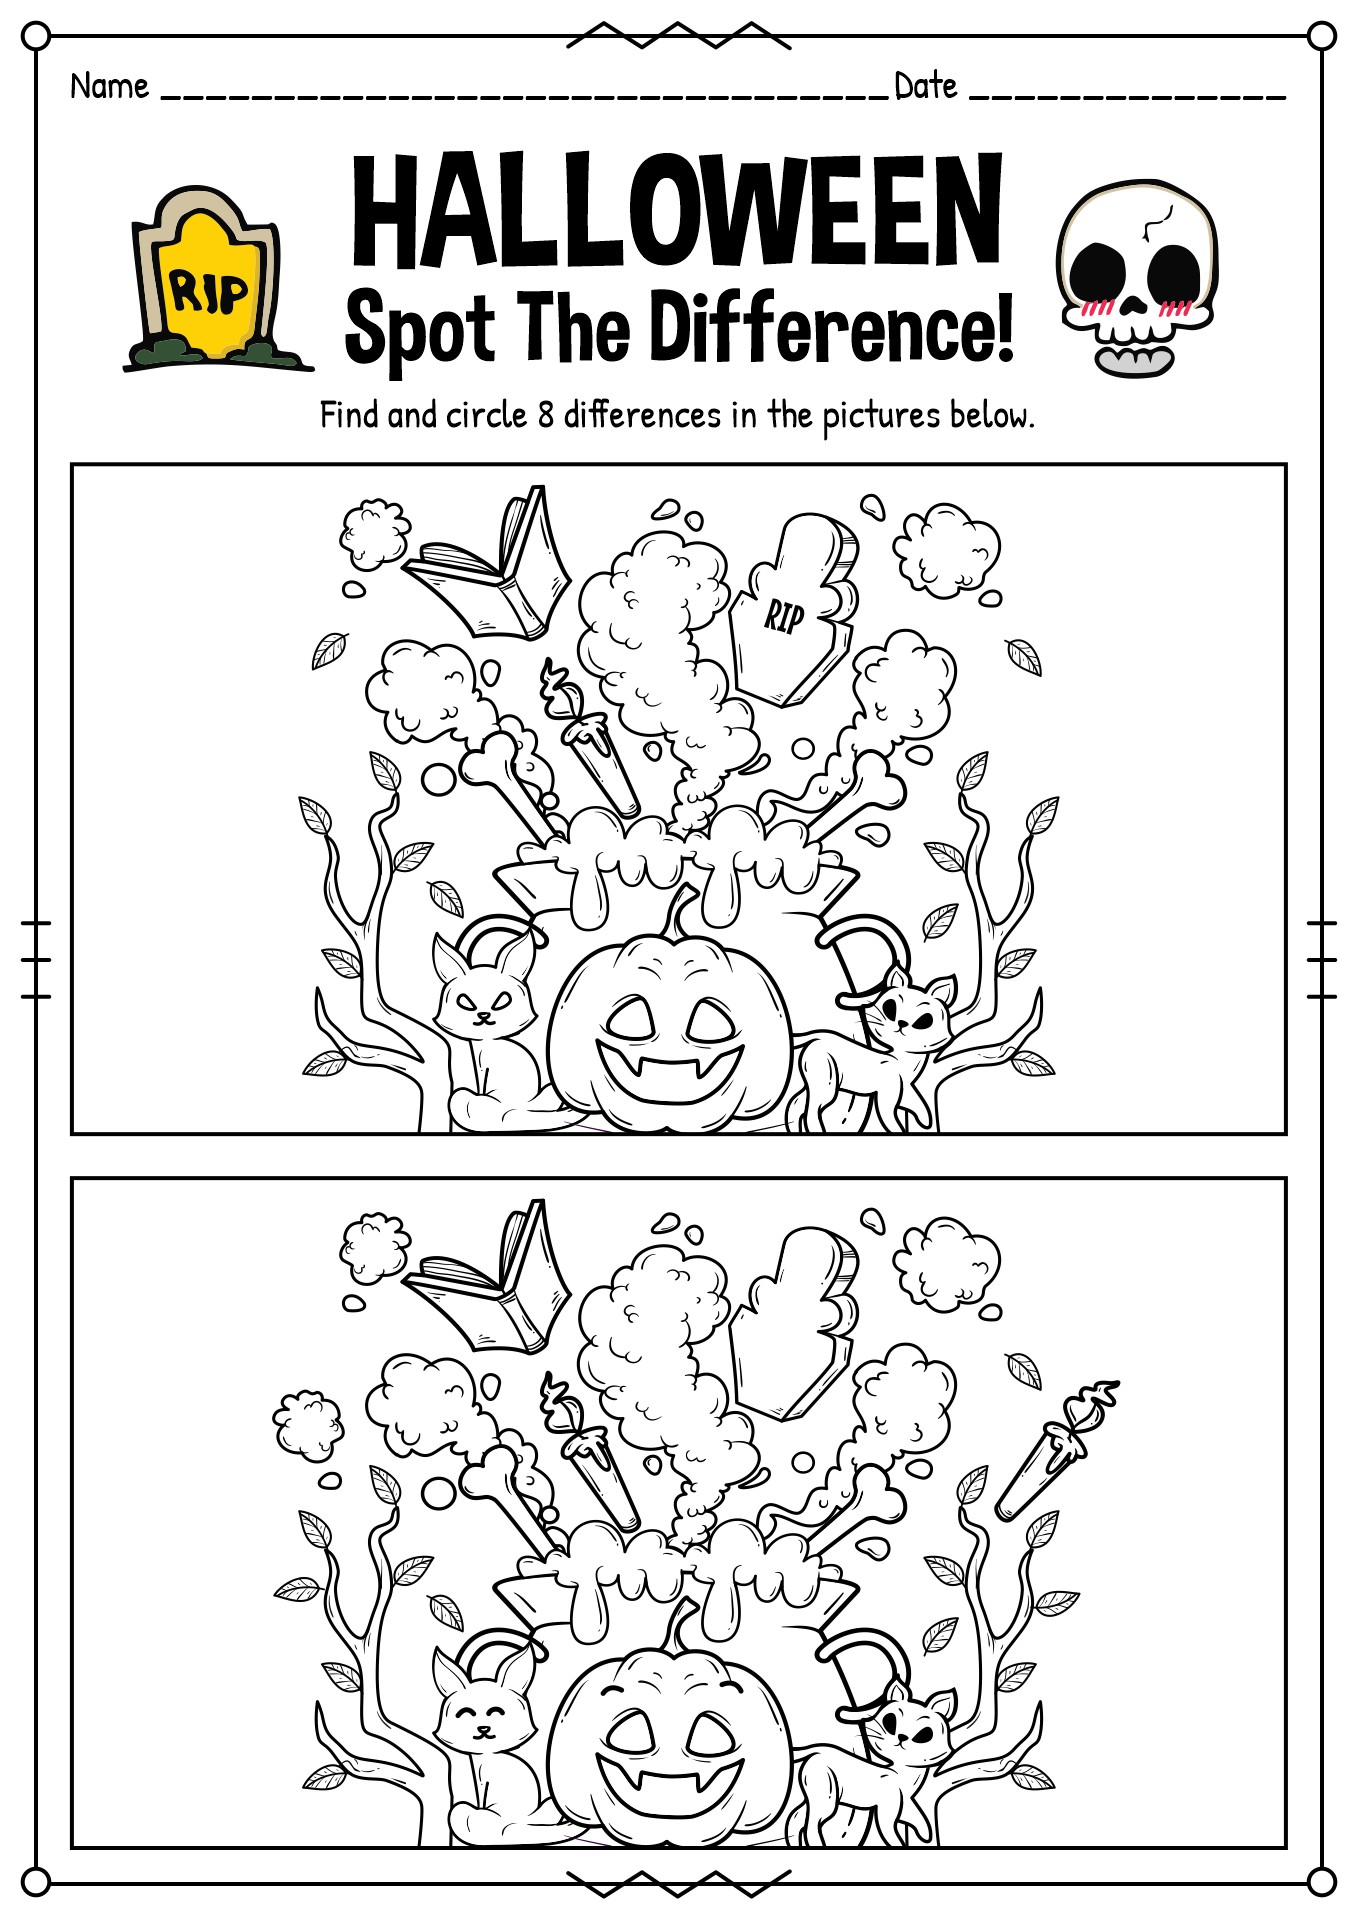 halloween-spot-the-difference-printable-printable-word-searches